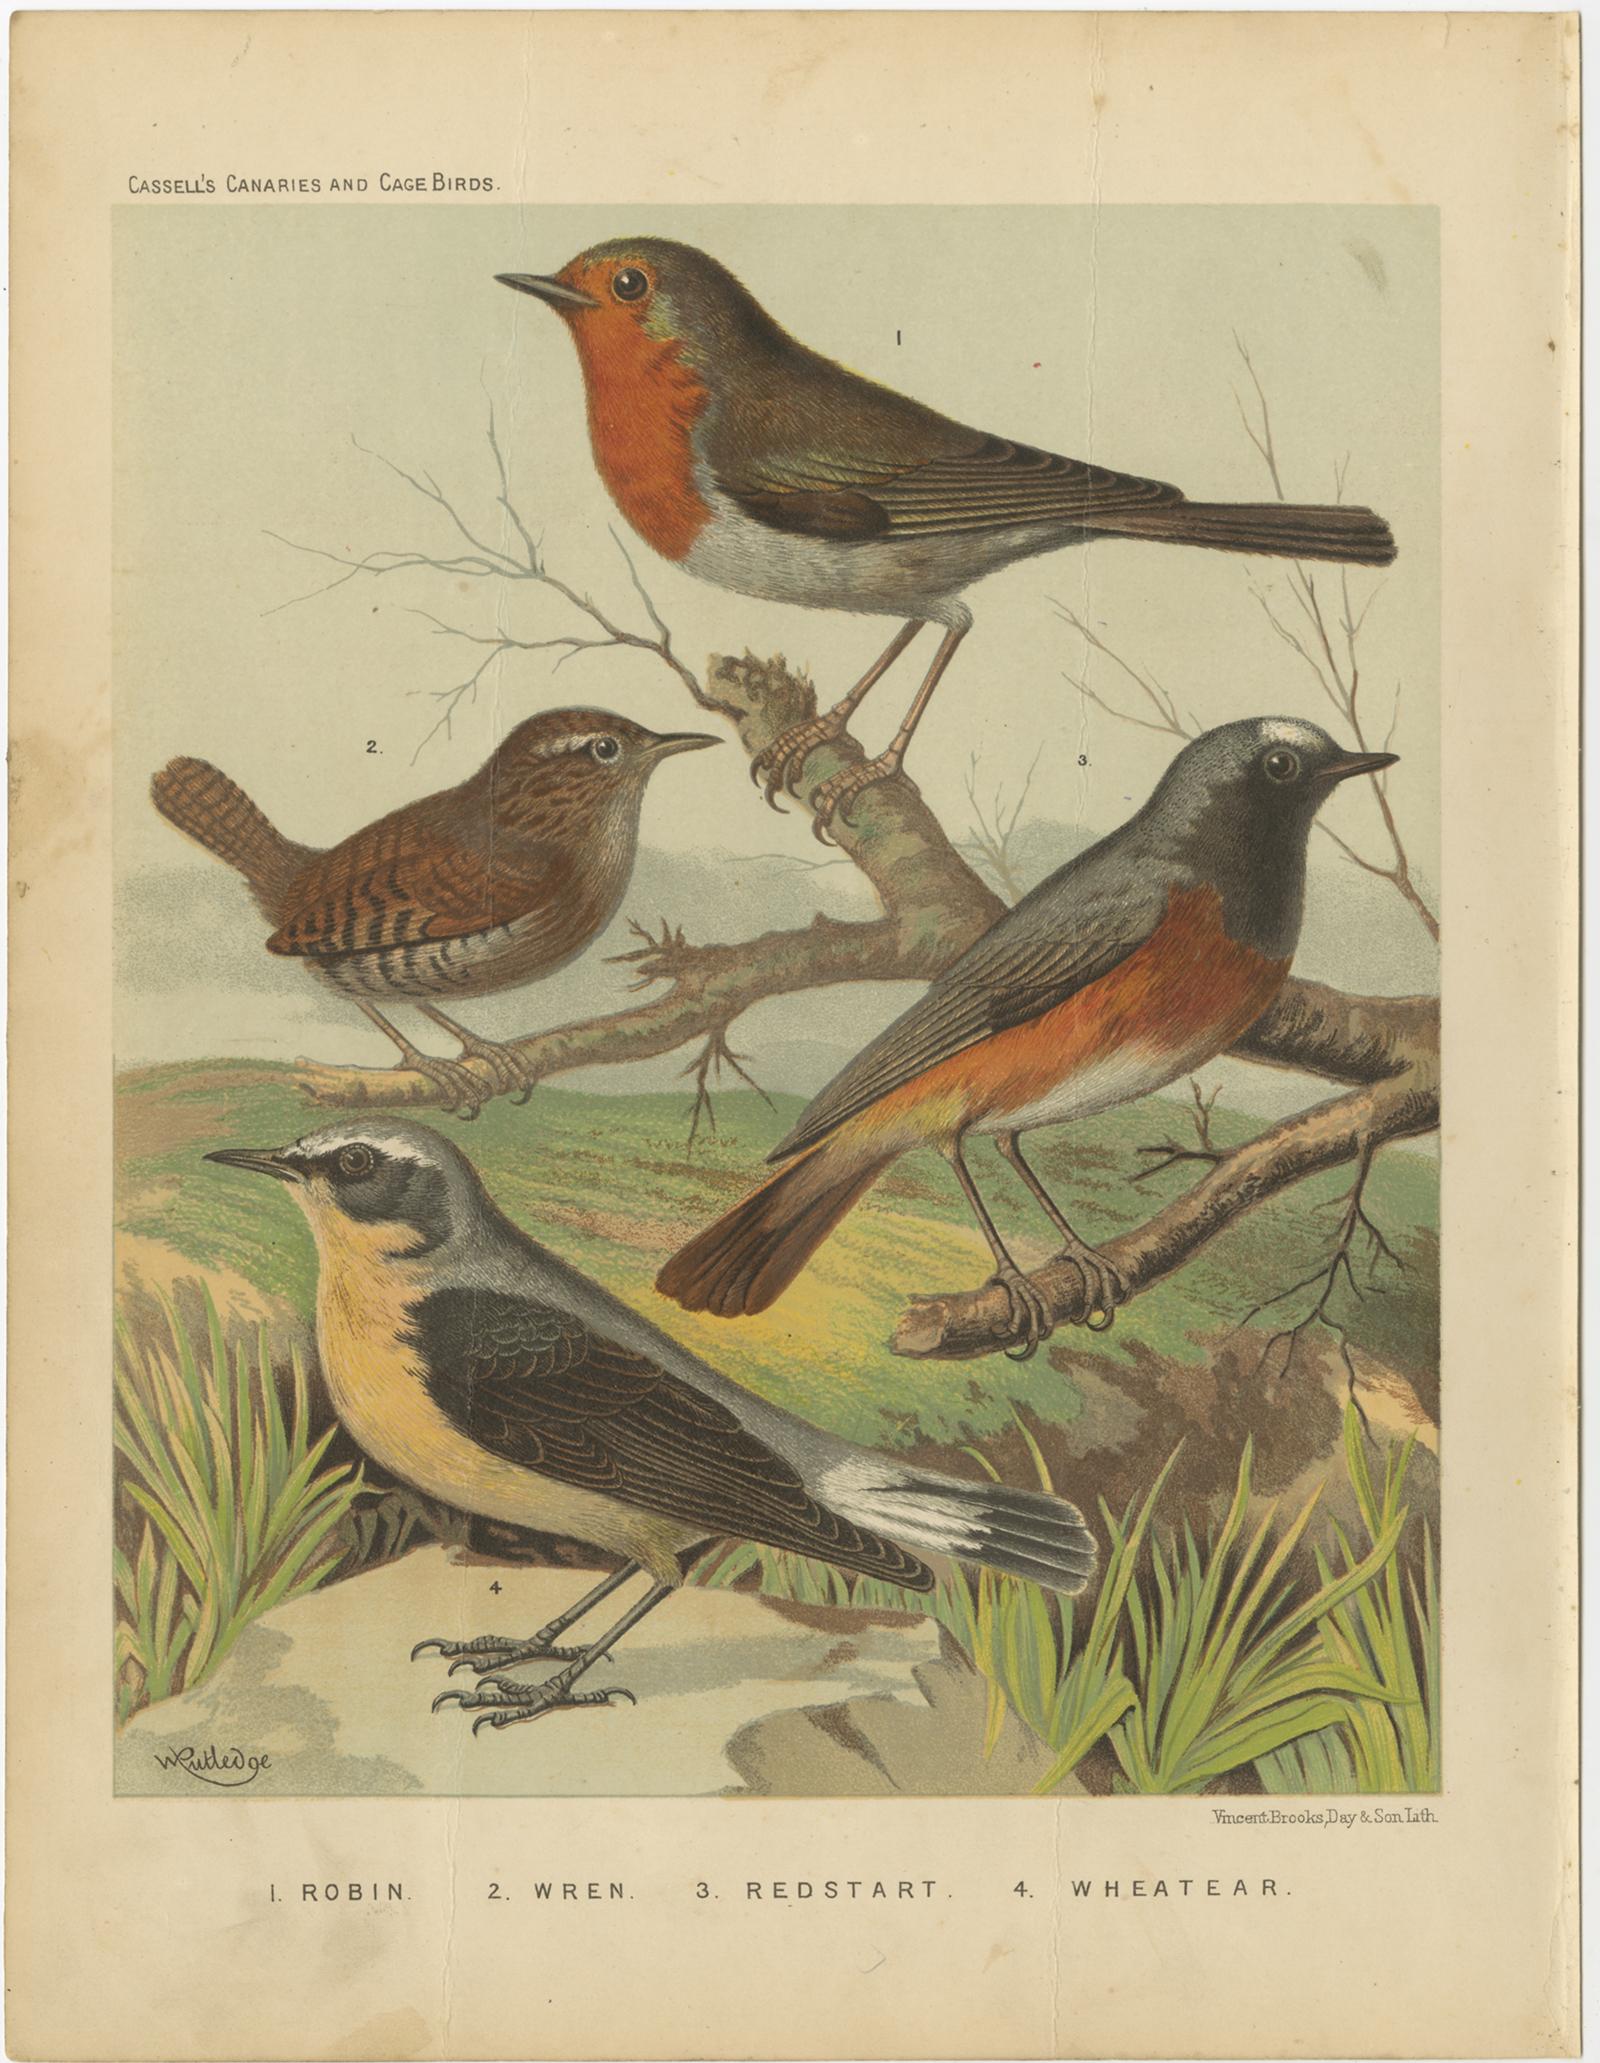 Antique bird print titled '1. Robin 2. Wren 3. Redstart 4. Wheatear'. Old bird print depicting Robin, Wren, Redstart, Wheatear. This print originates from: 'Illustrated book of canaries and cage-birds' by W. A. Blackston, W. Swaysland and August F.